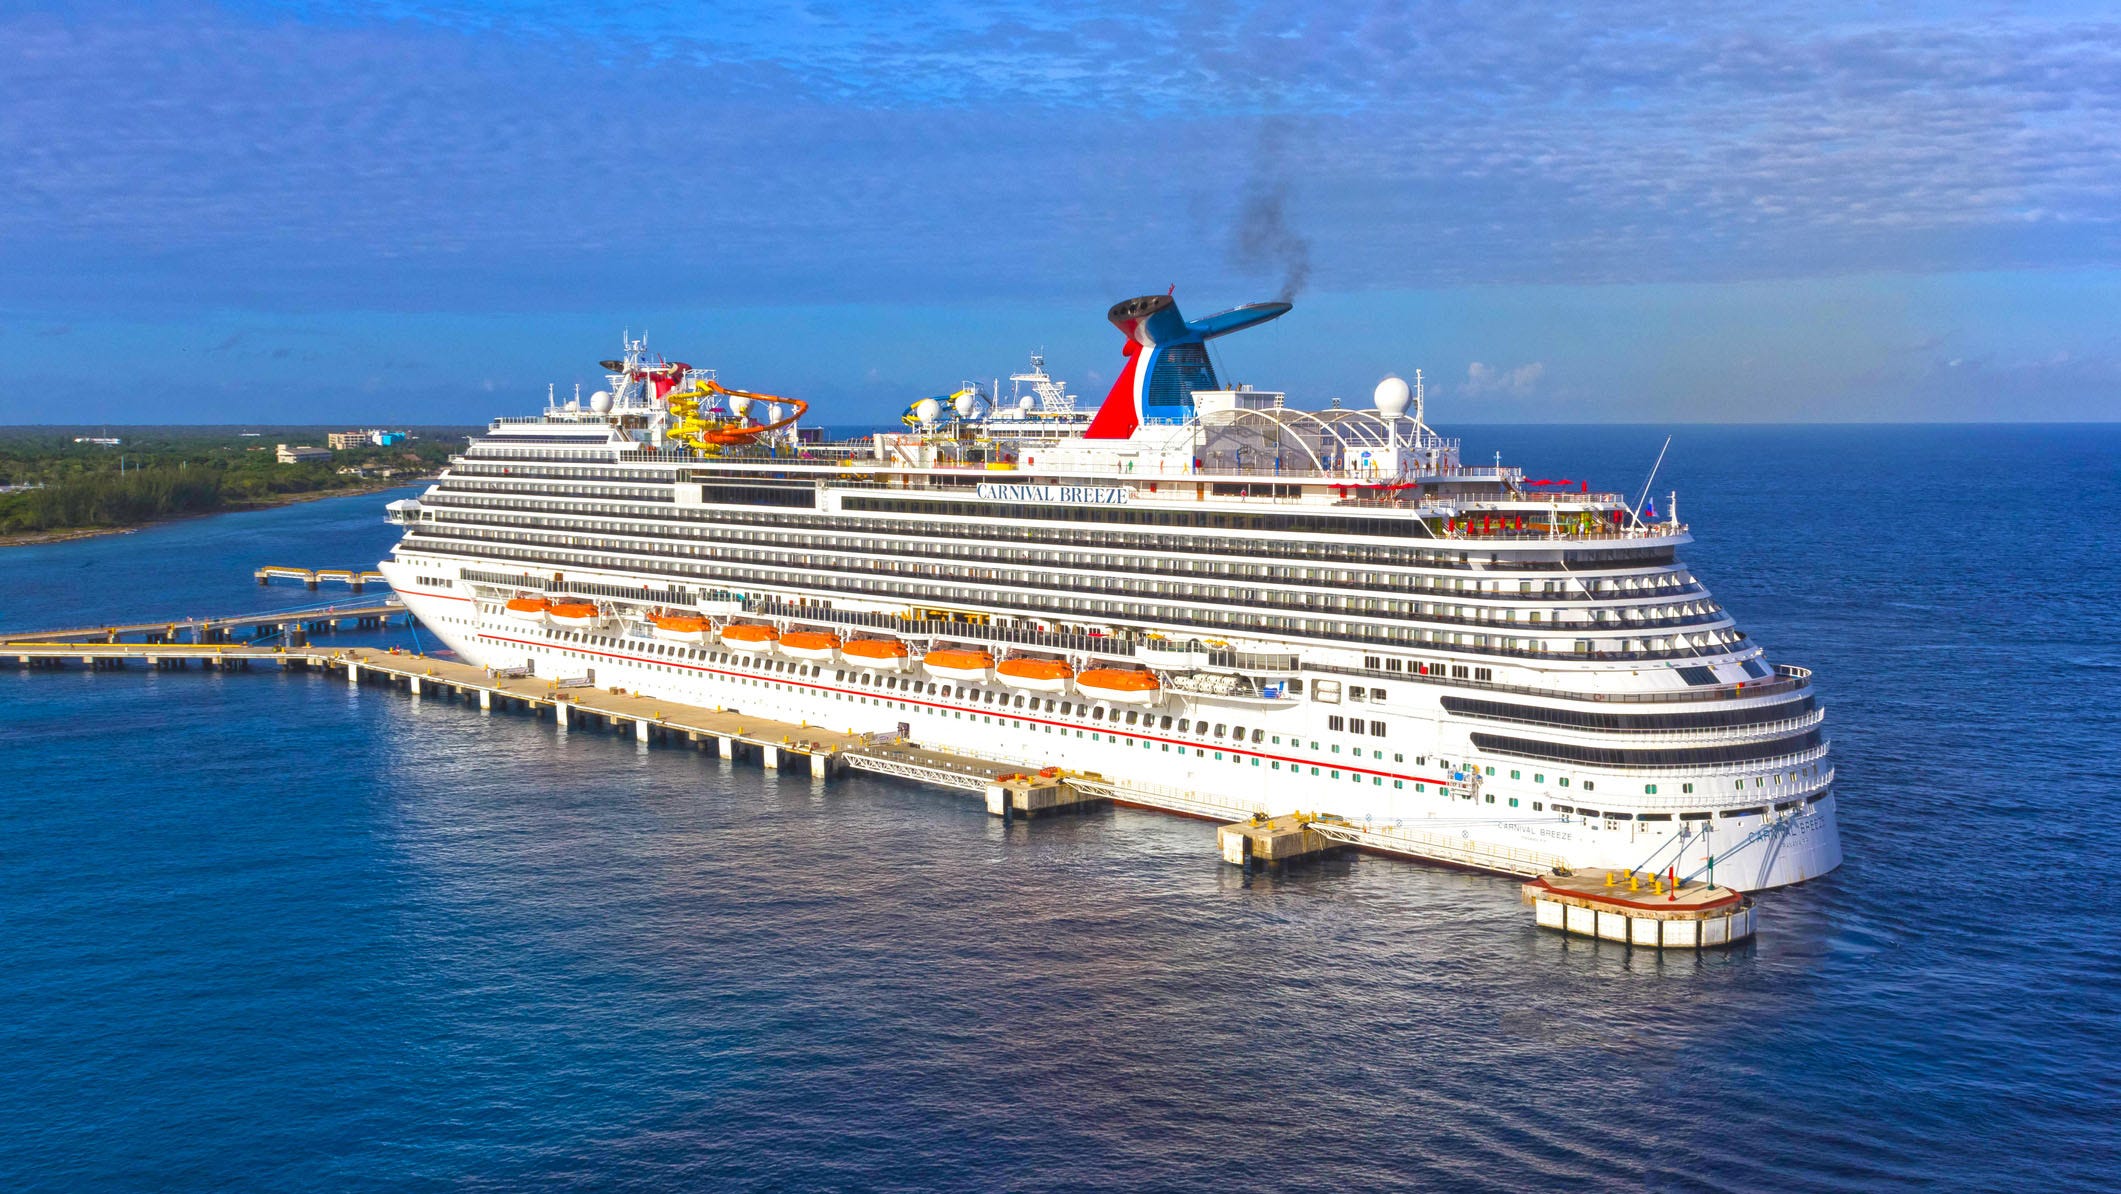 Amid coronavirus outbreak, Carnival Cruise Line offers onship credits